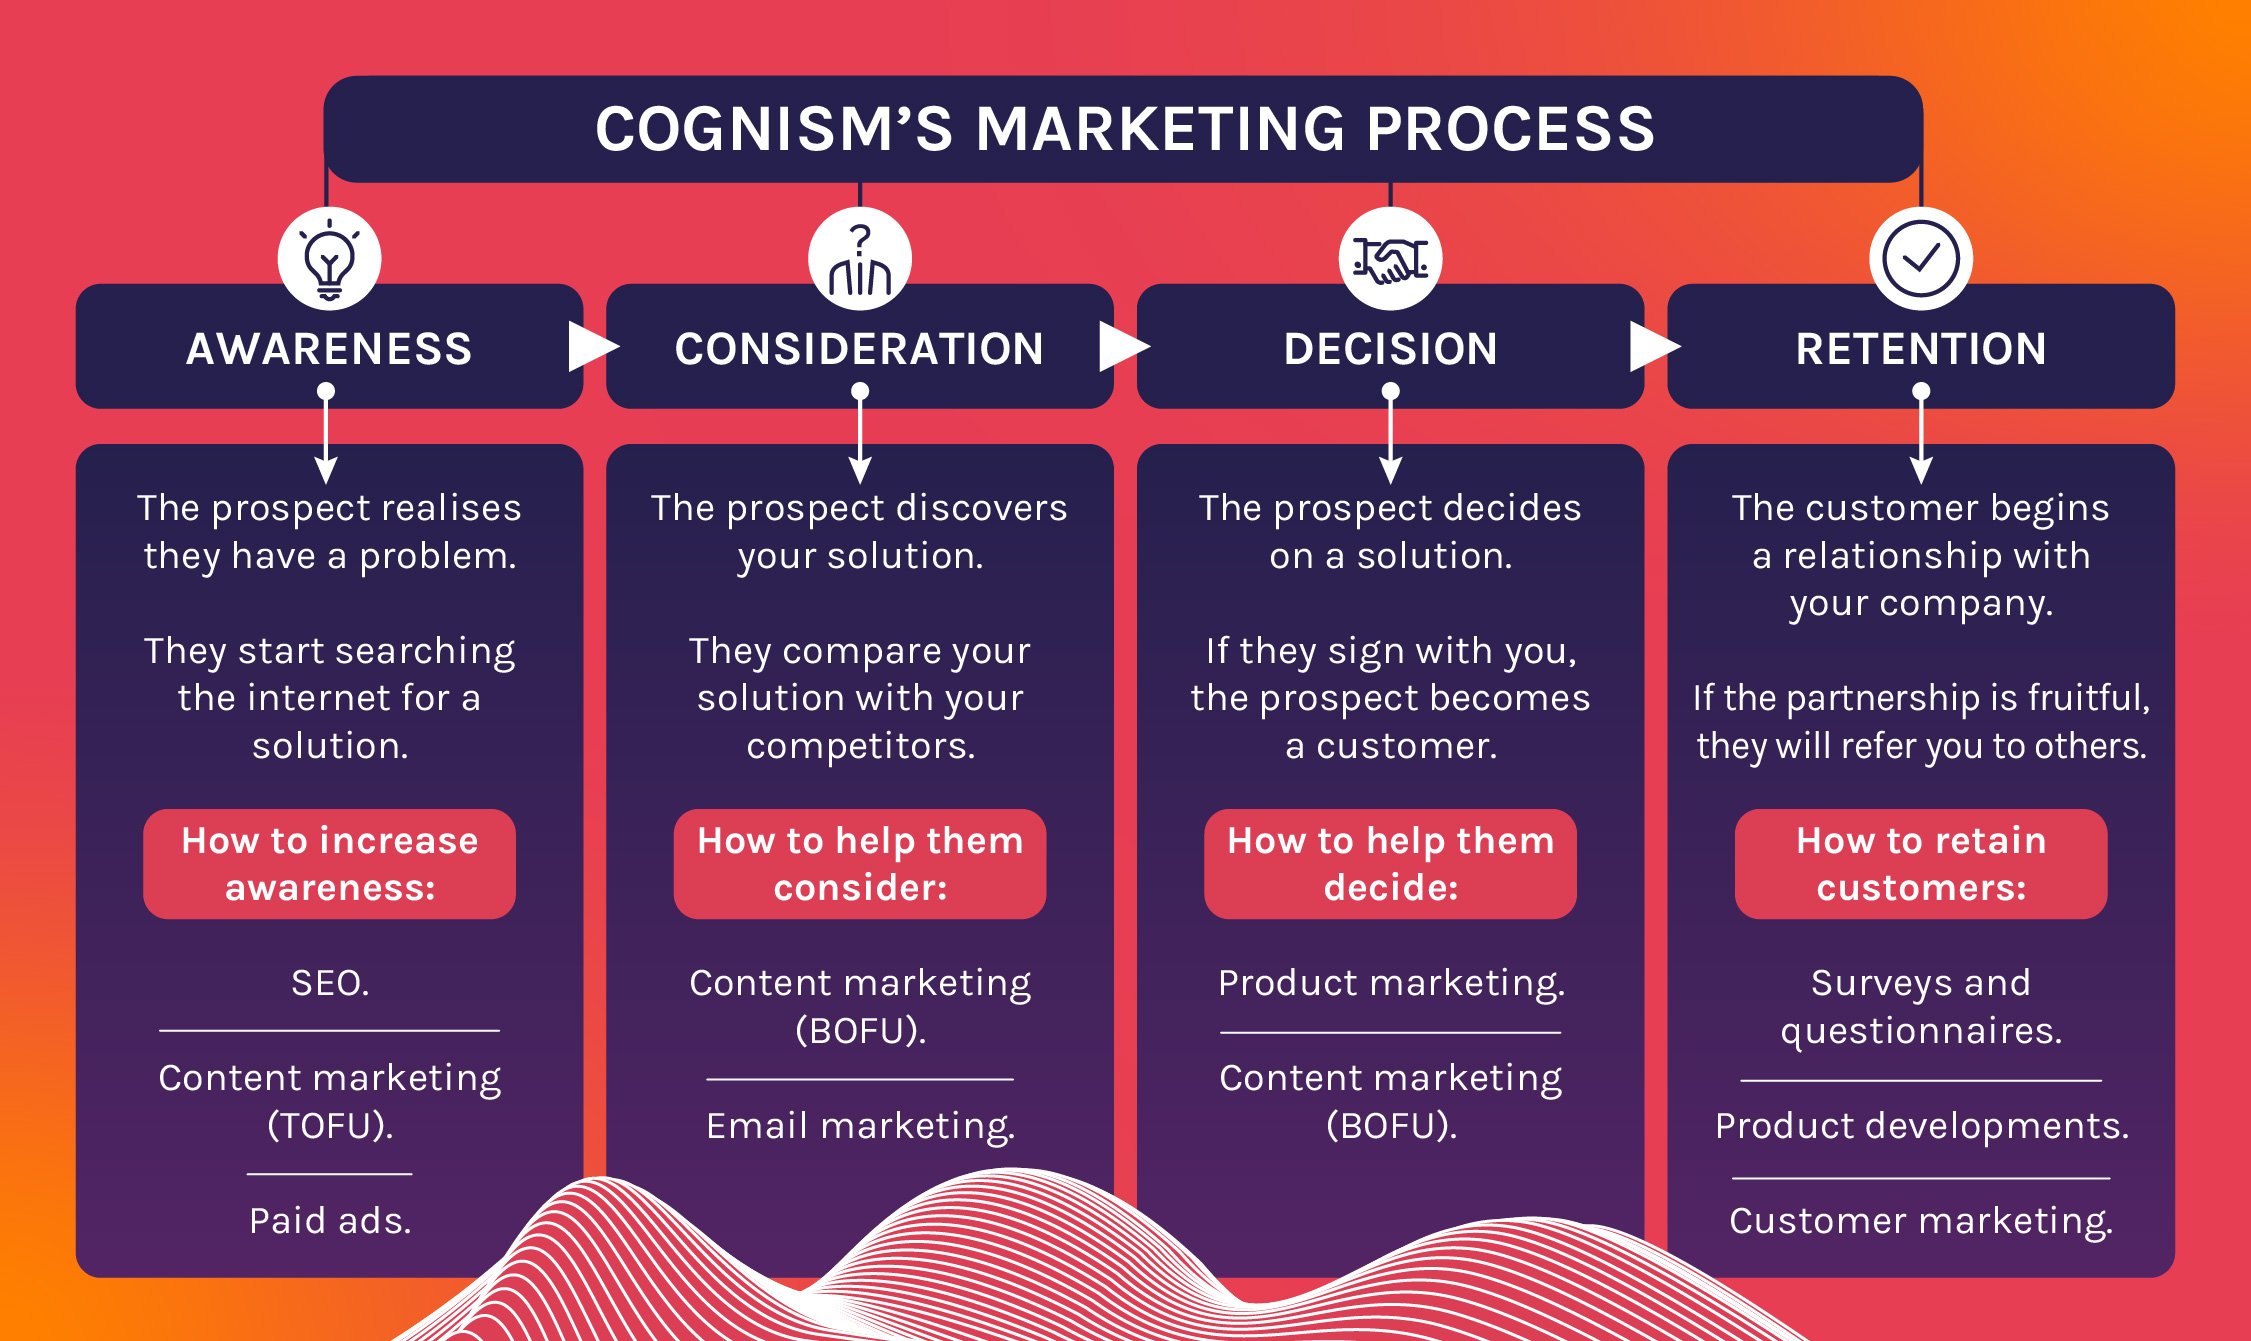 Discover the B2B marketing process behind Cognism and how we market to our buyers at every stage of their buying journey.